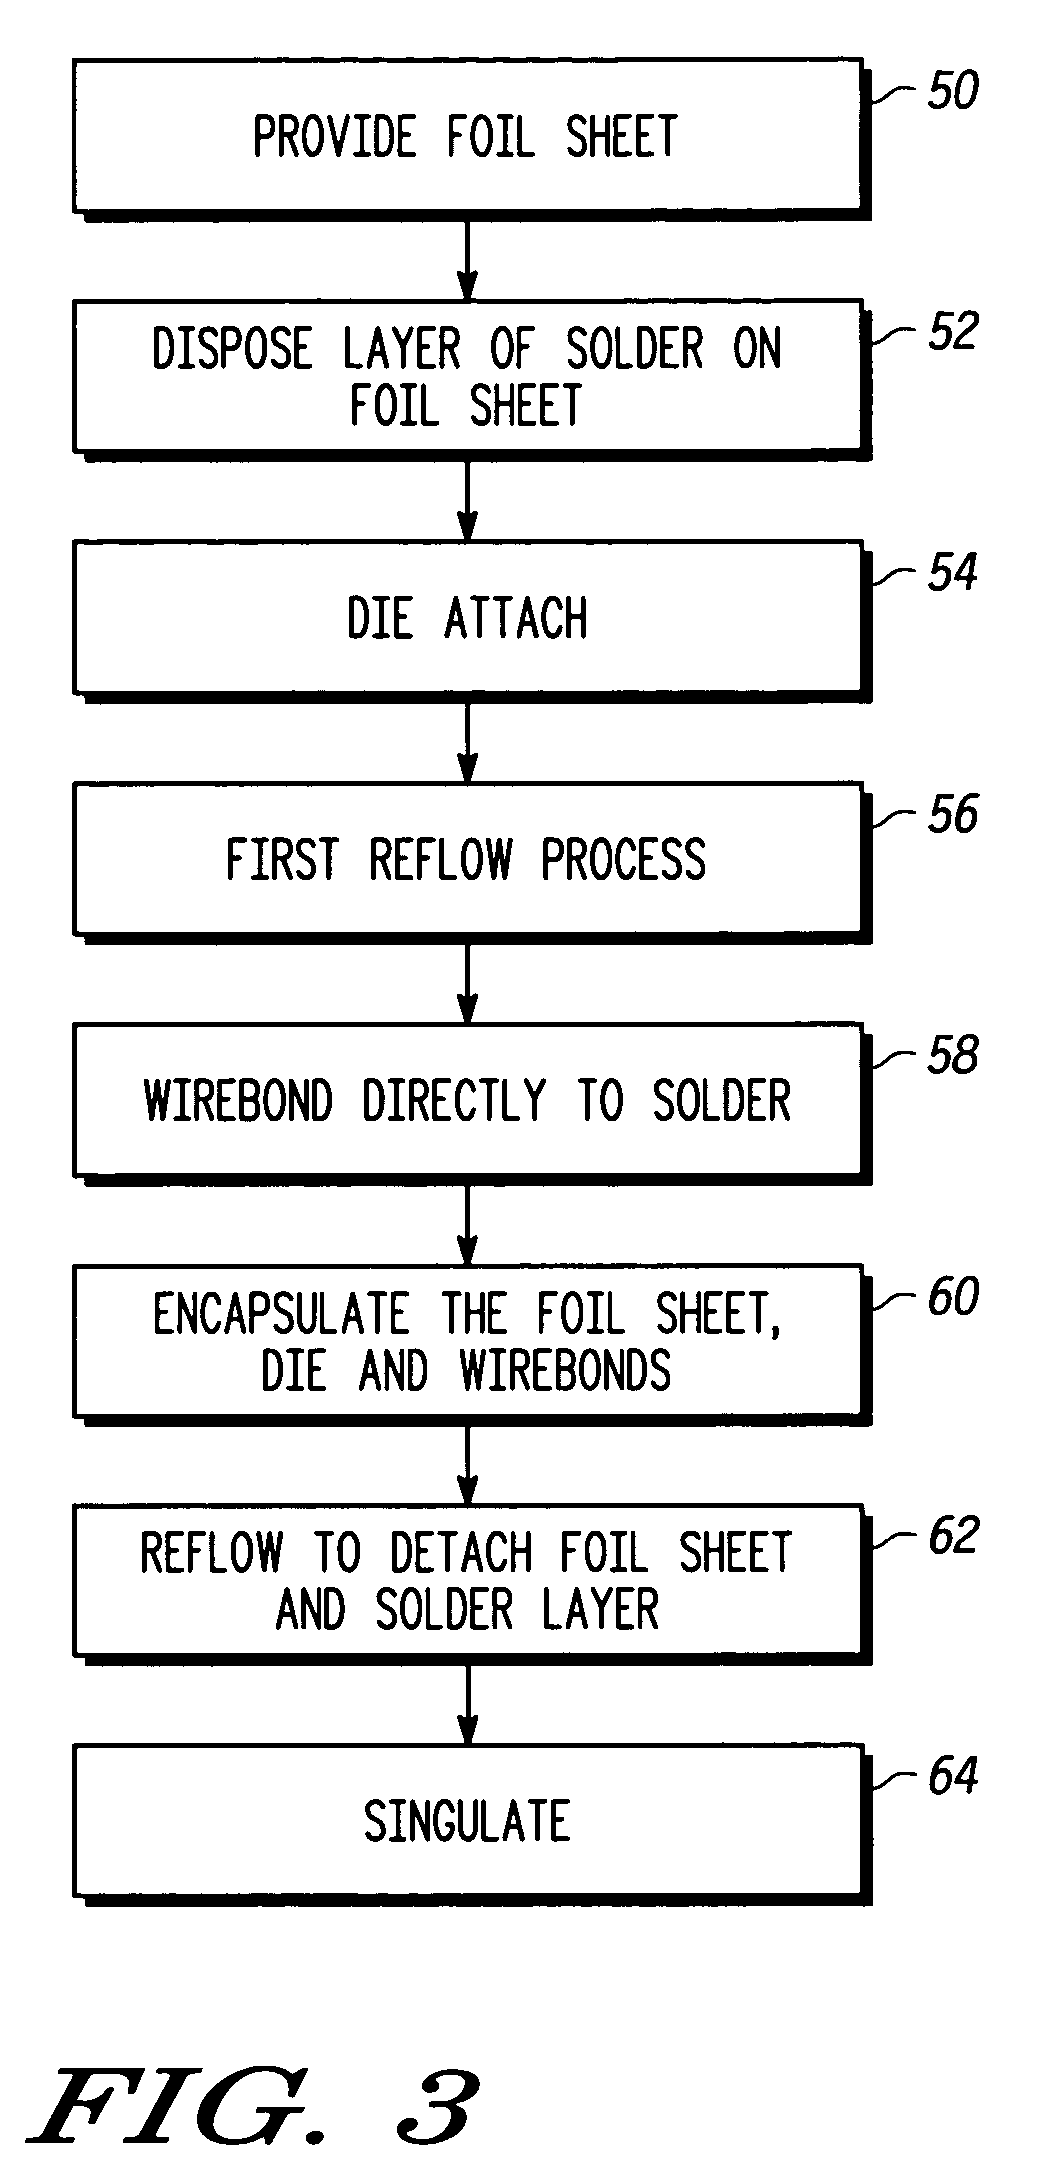 Land grid array packaged device and method of forming same